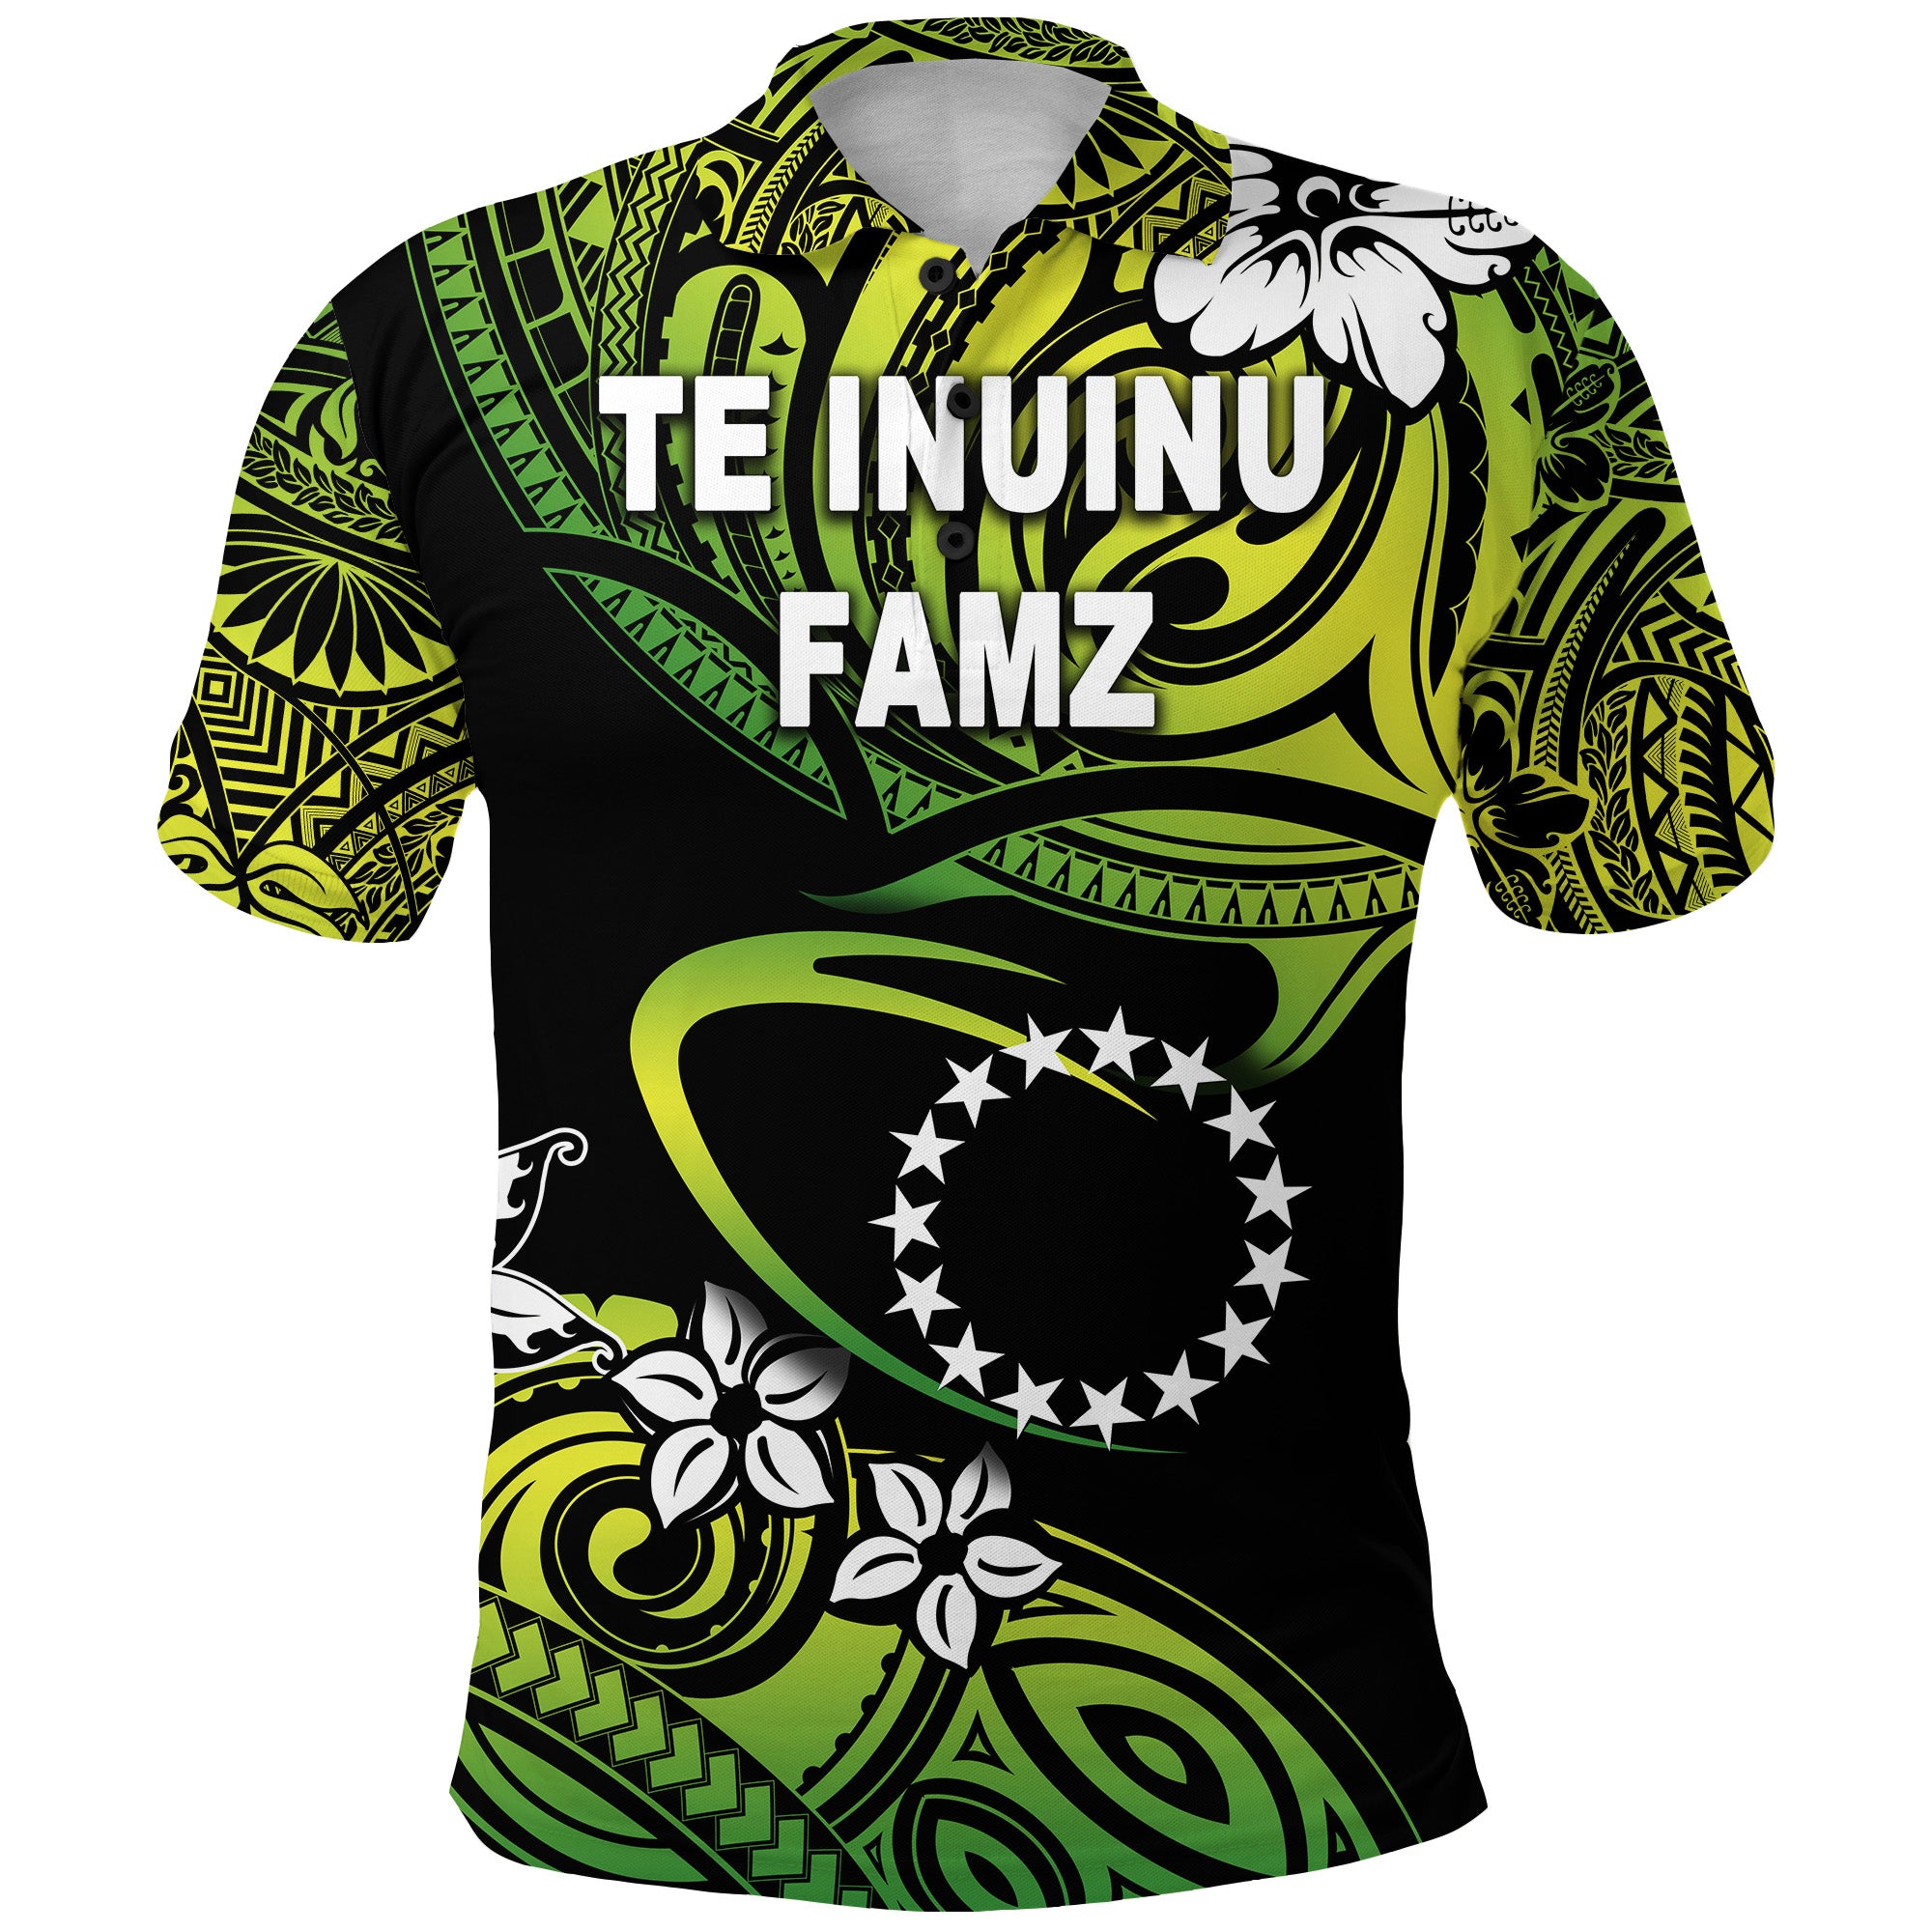 TE INUINU FAMZ Cook Islands Rugby Polo Shirt Unique Vibes Green LT8 Unisex Green - Polynesian Pride